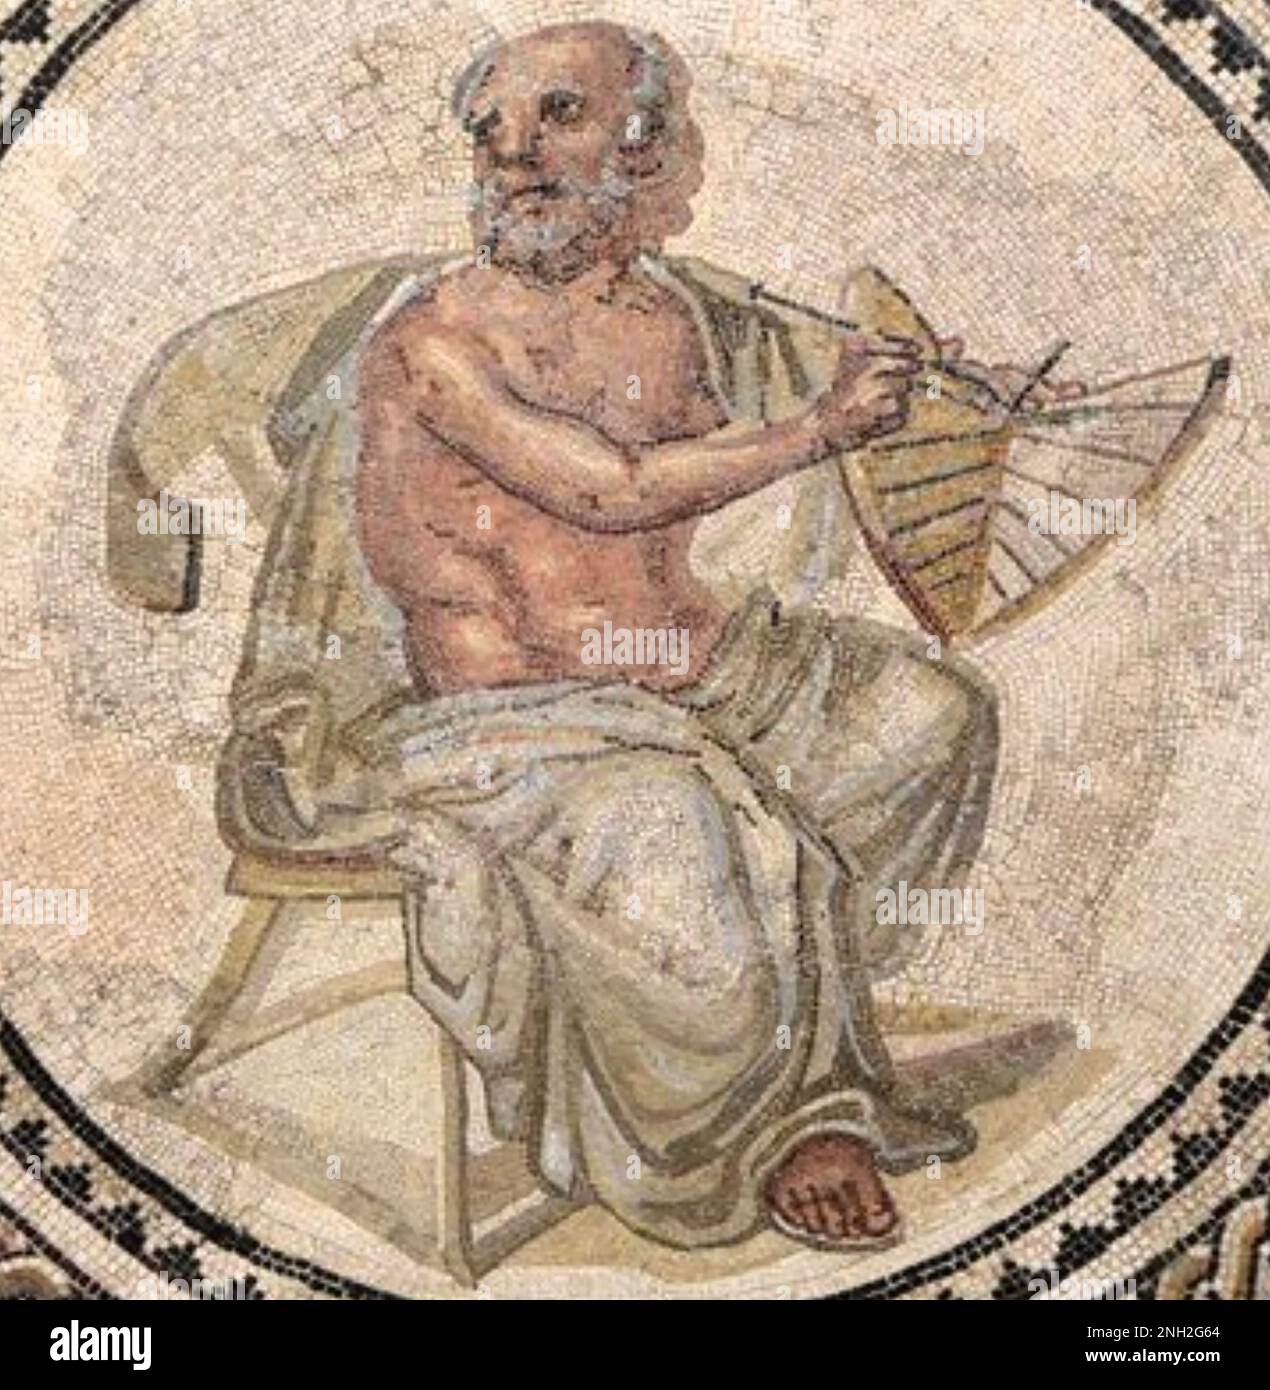 ANAXIMANDER (c 610- c 546 BC) Greek philosopher. A Roman mosaic from the early third century AD from Trweir, Germany. He is holding a sundial. Stock Photo